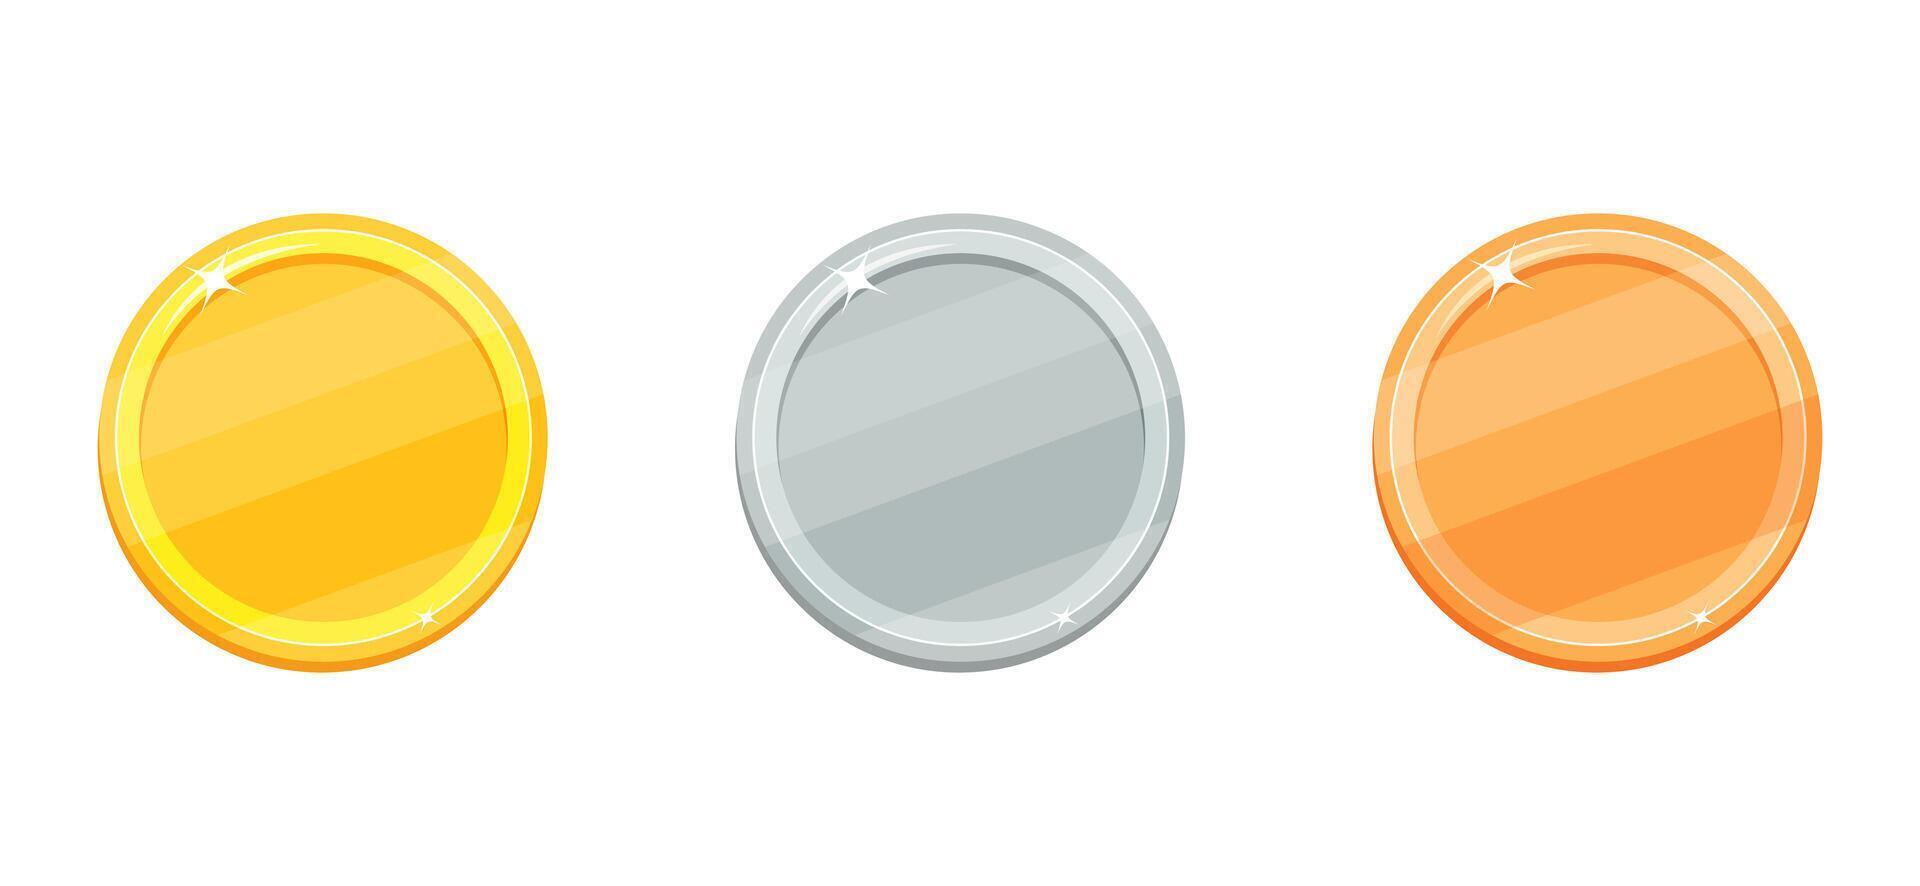 Set of medallions in gold, bronze and copper colors. Round coins in cartoon style. Blank badges for awards. vector